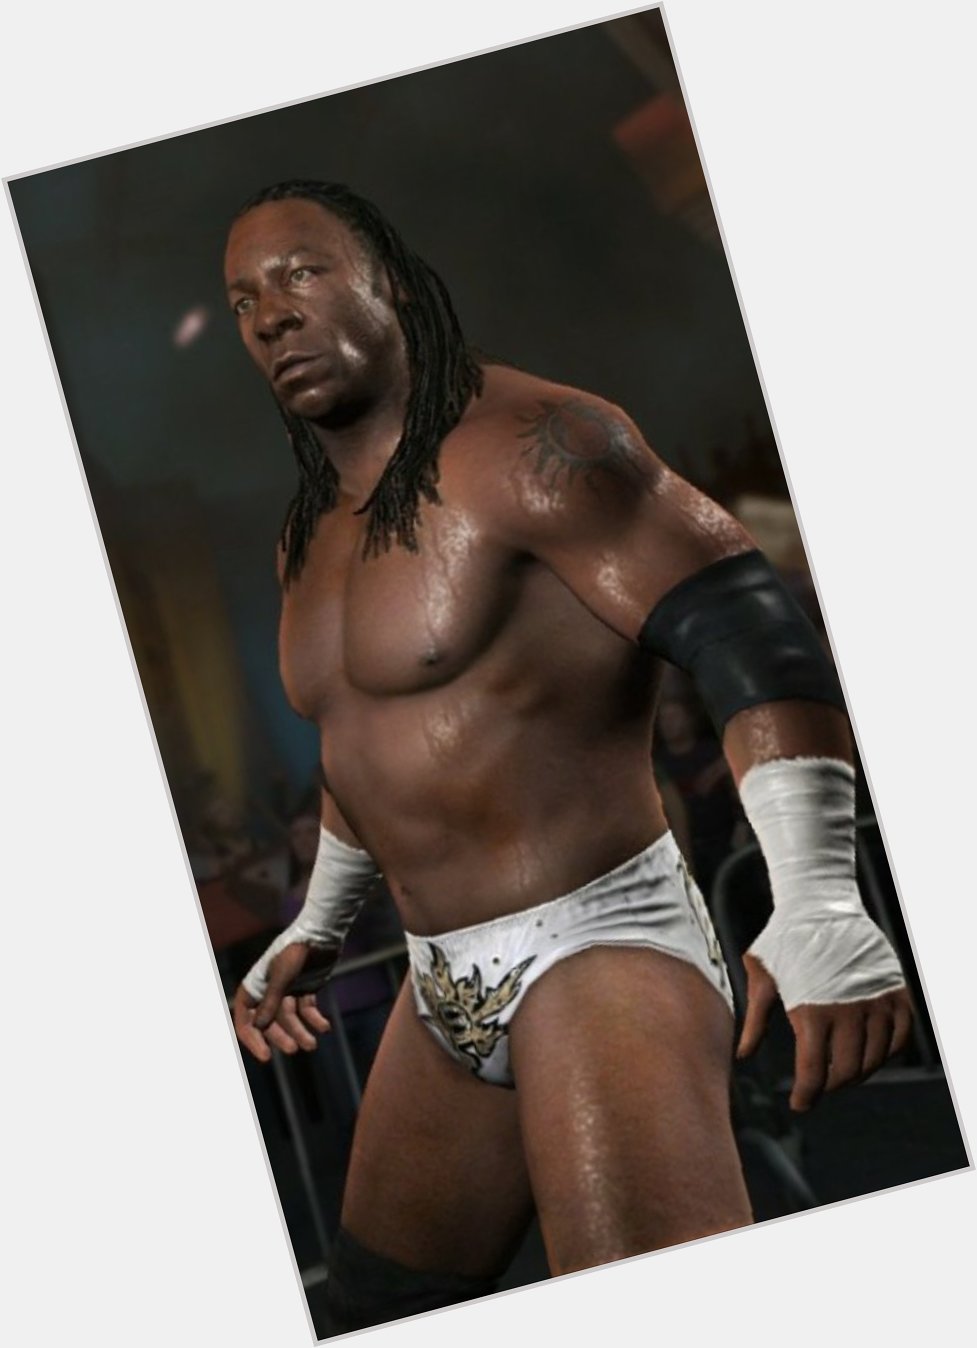    Happy birthday Booker T sir and 2K I want his model to look like that in WWE 2K21 